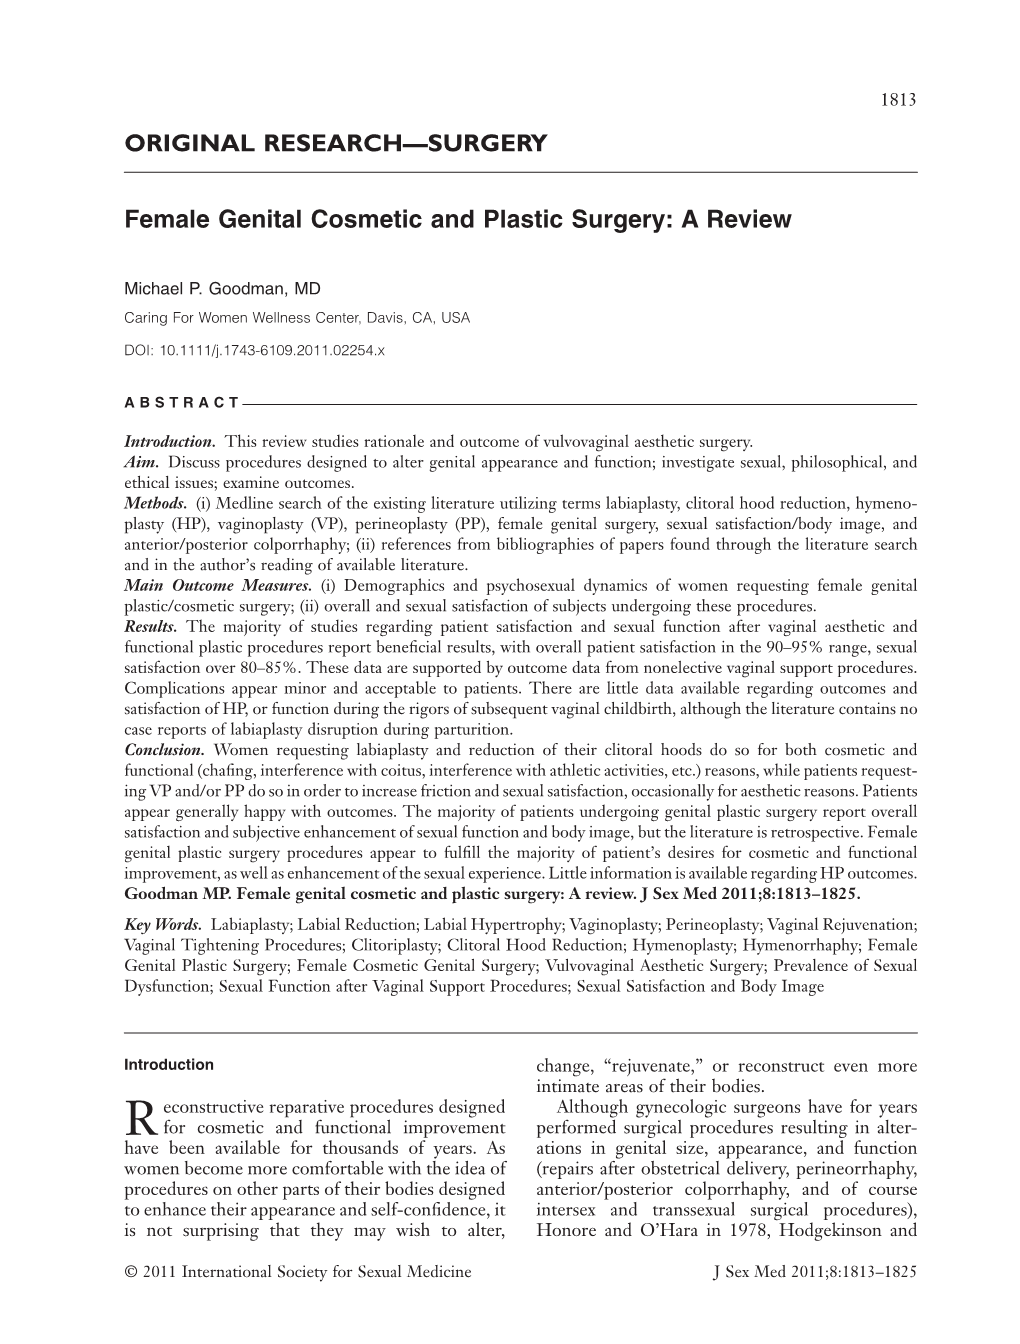 Female Genital Cosmetic and Plastic Surgery: a Reviewjsm 2254 1813..1825